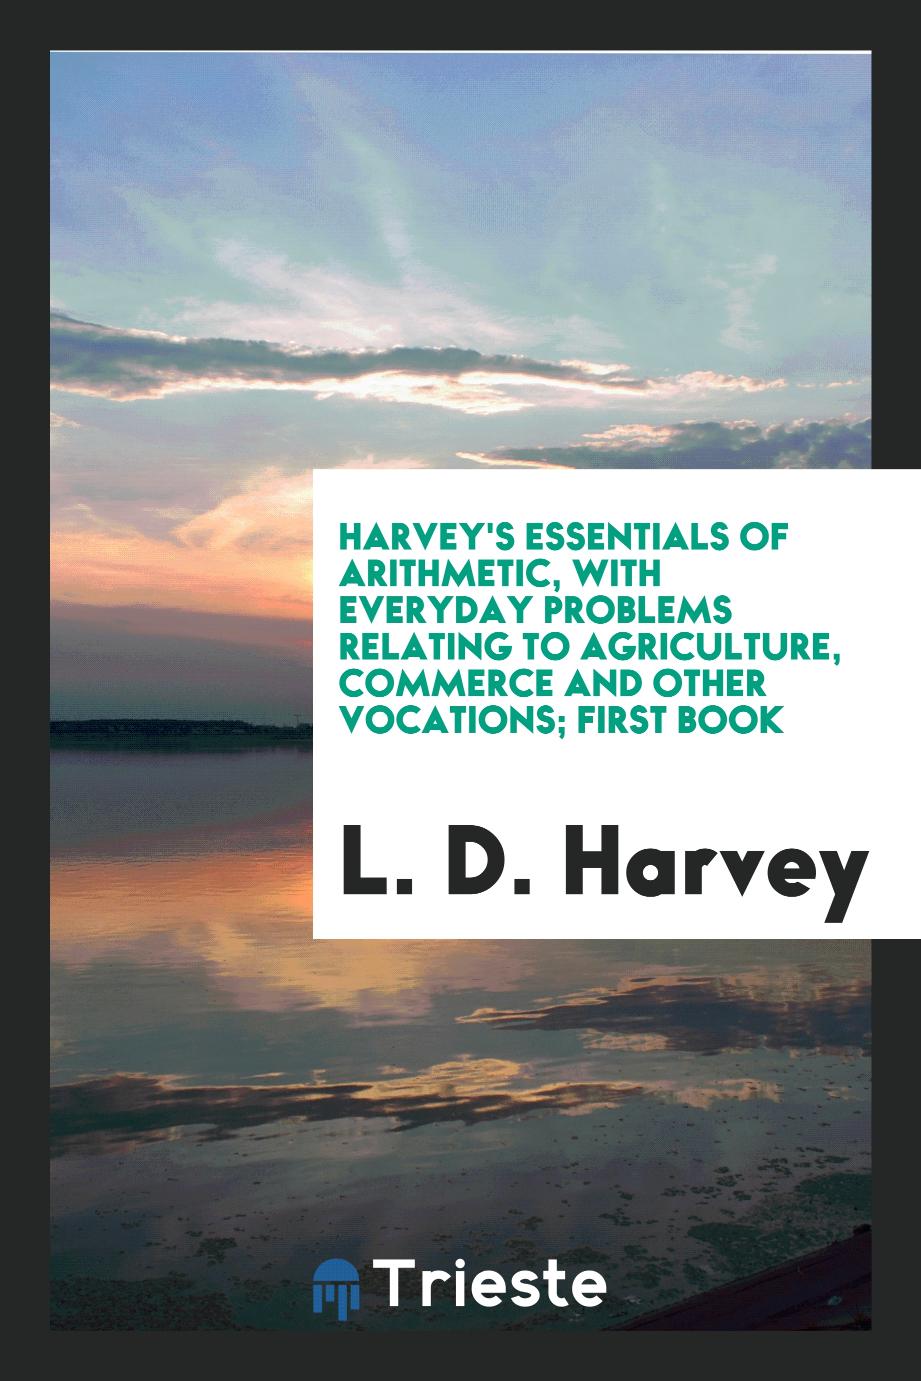 Harvey's Essentials of Arithmetic, with Everyday Problems Relating to Agriculture, Commerce and Other Vocations; First Book